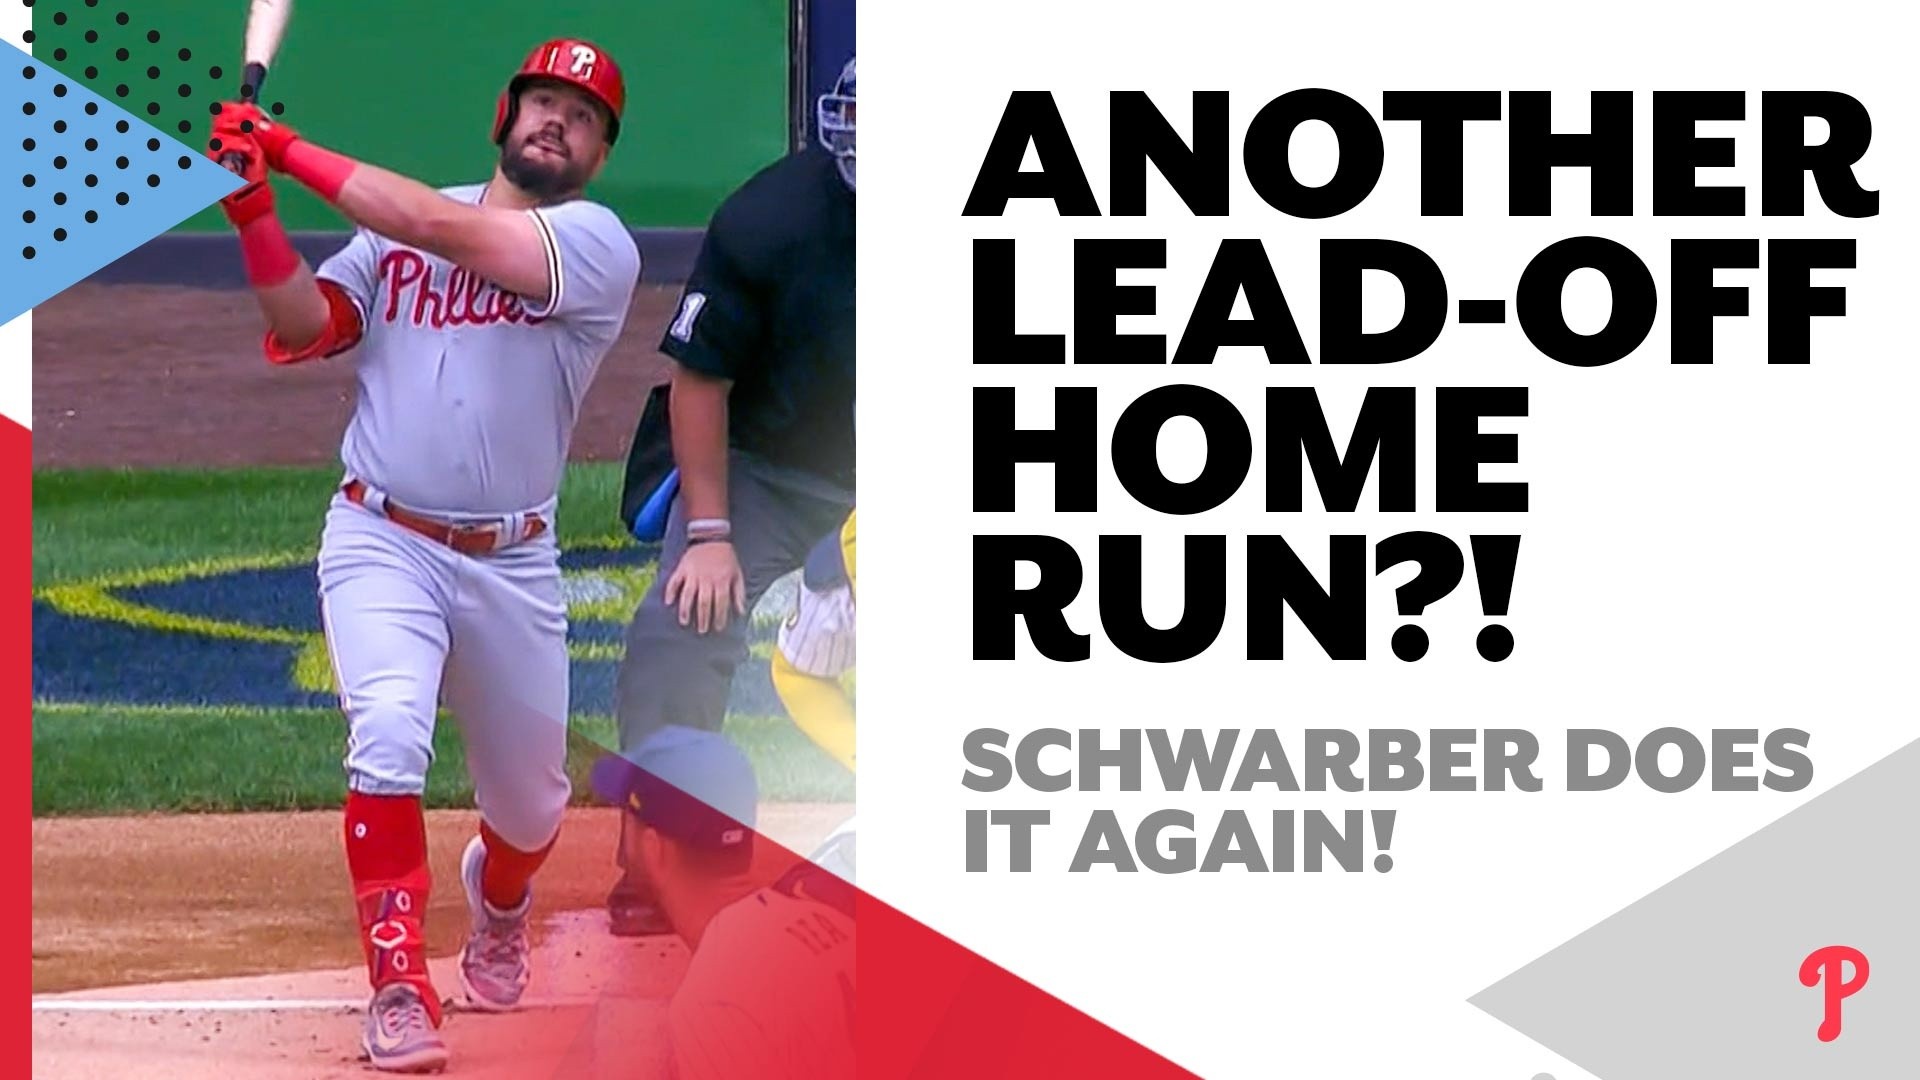 Are you kidding?! Schwarber hits ANOTHER lead-off home run – NBC